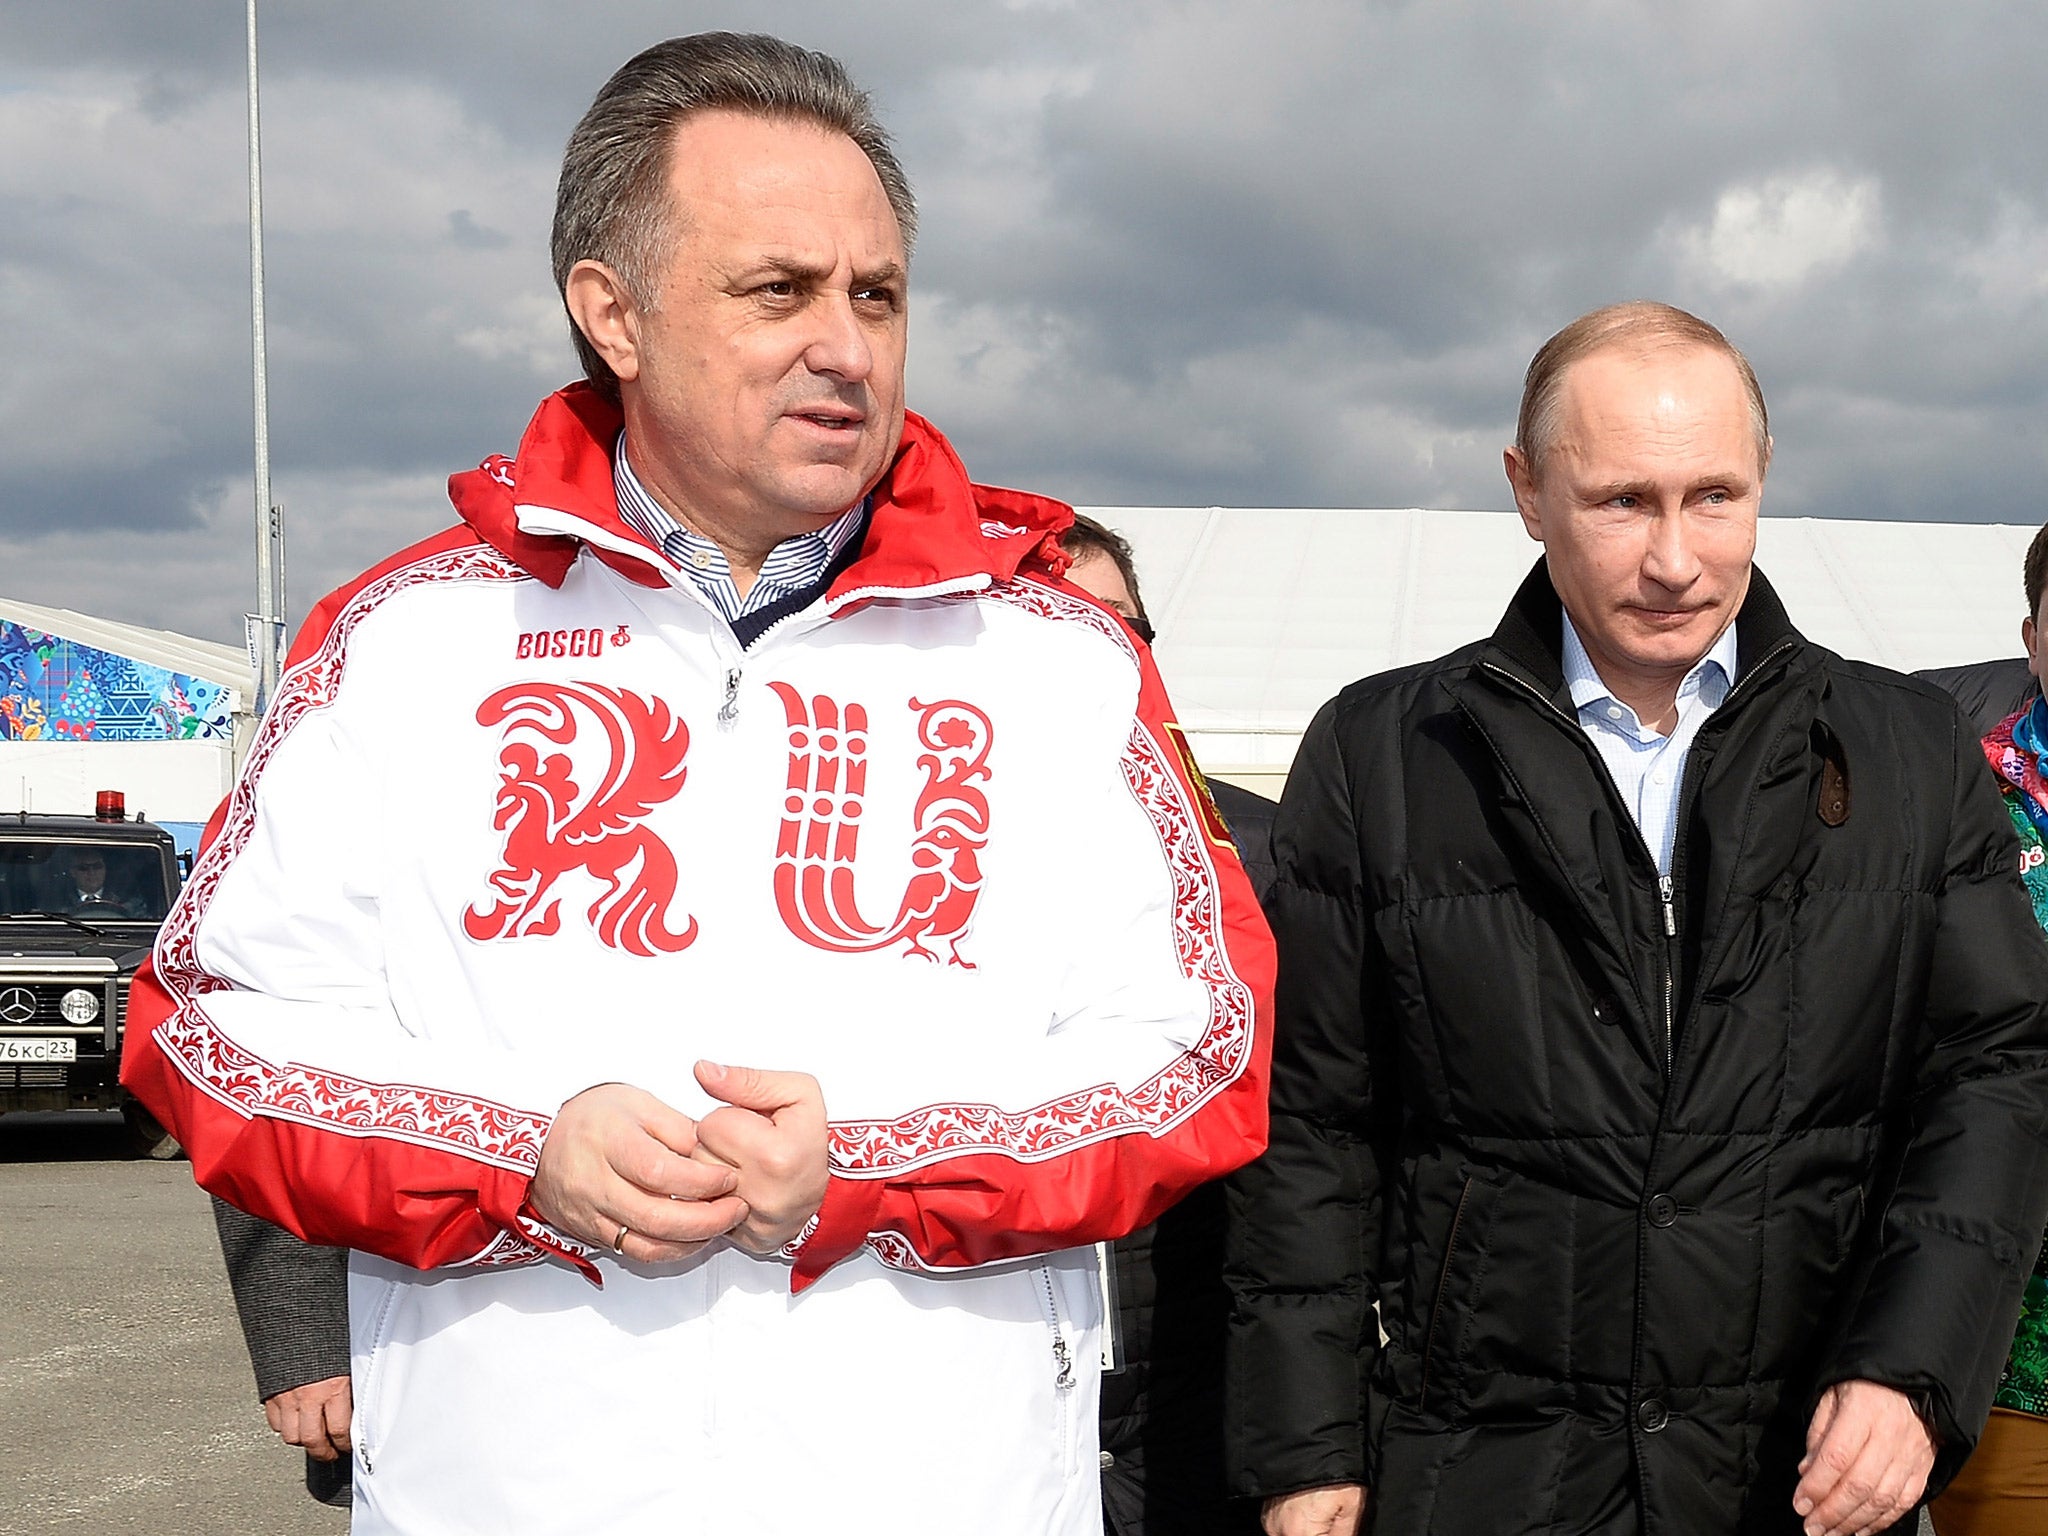 Vitaly Mutko and Vladimir Putin has been vocal of their anger and denial at any doping allegations against Russia